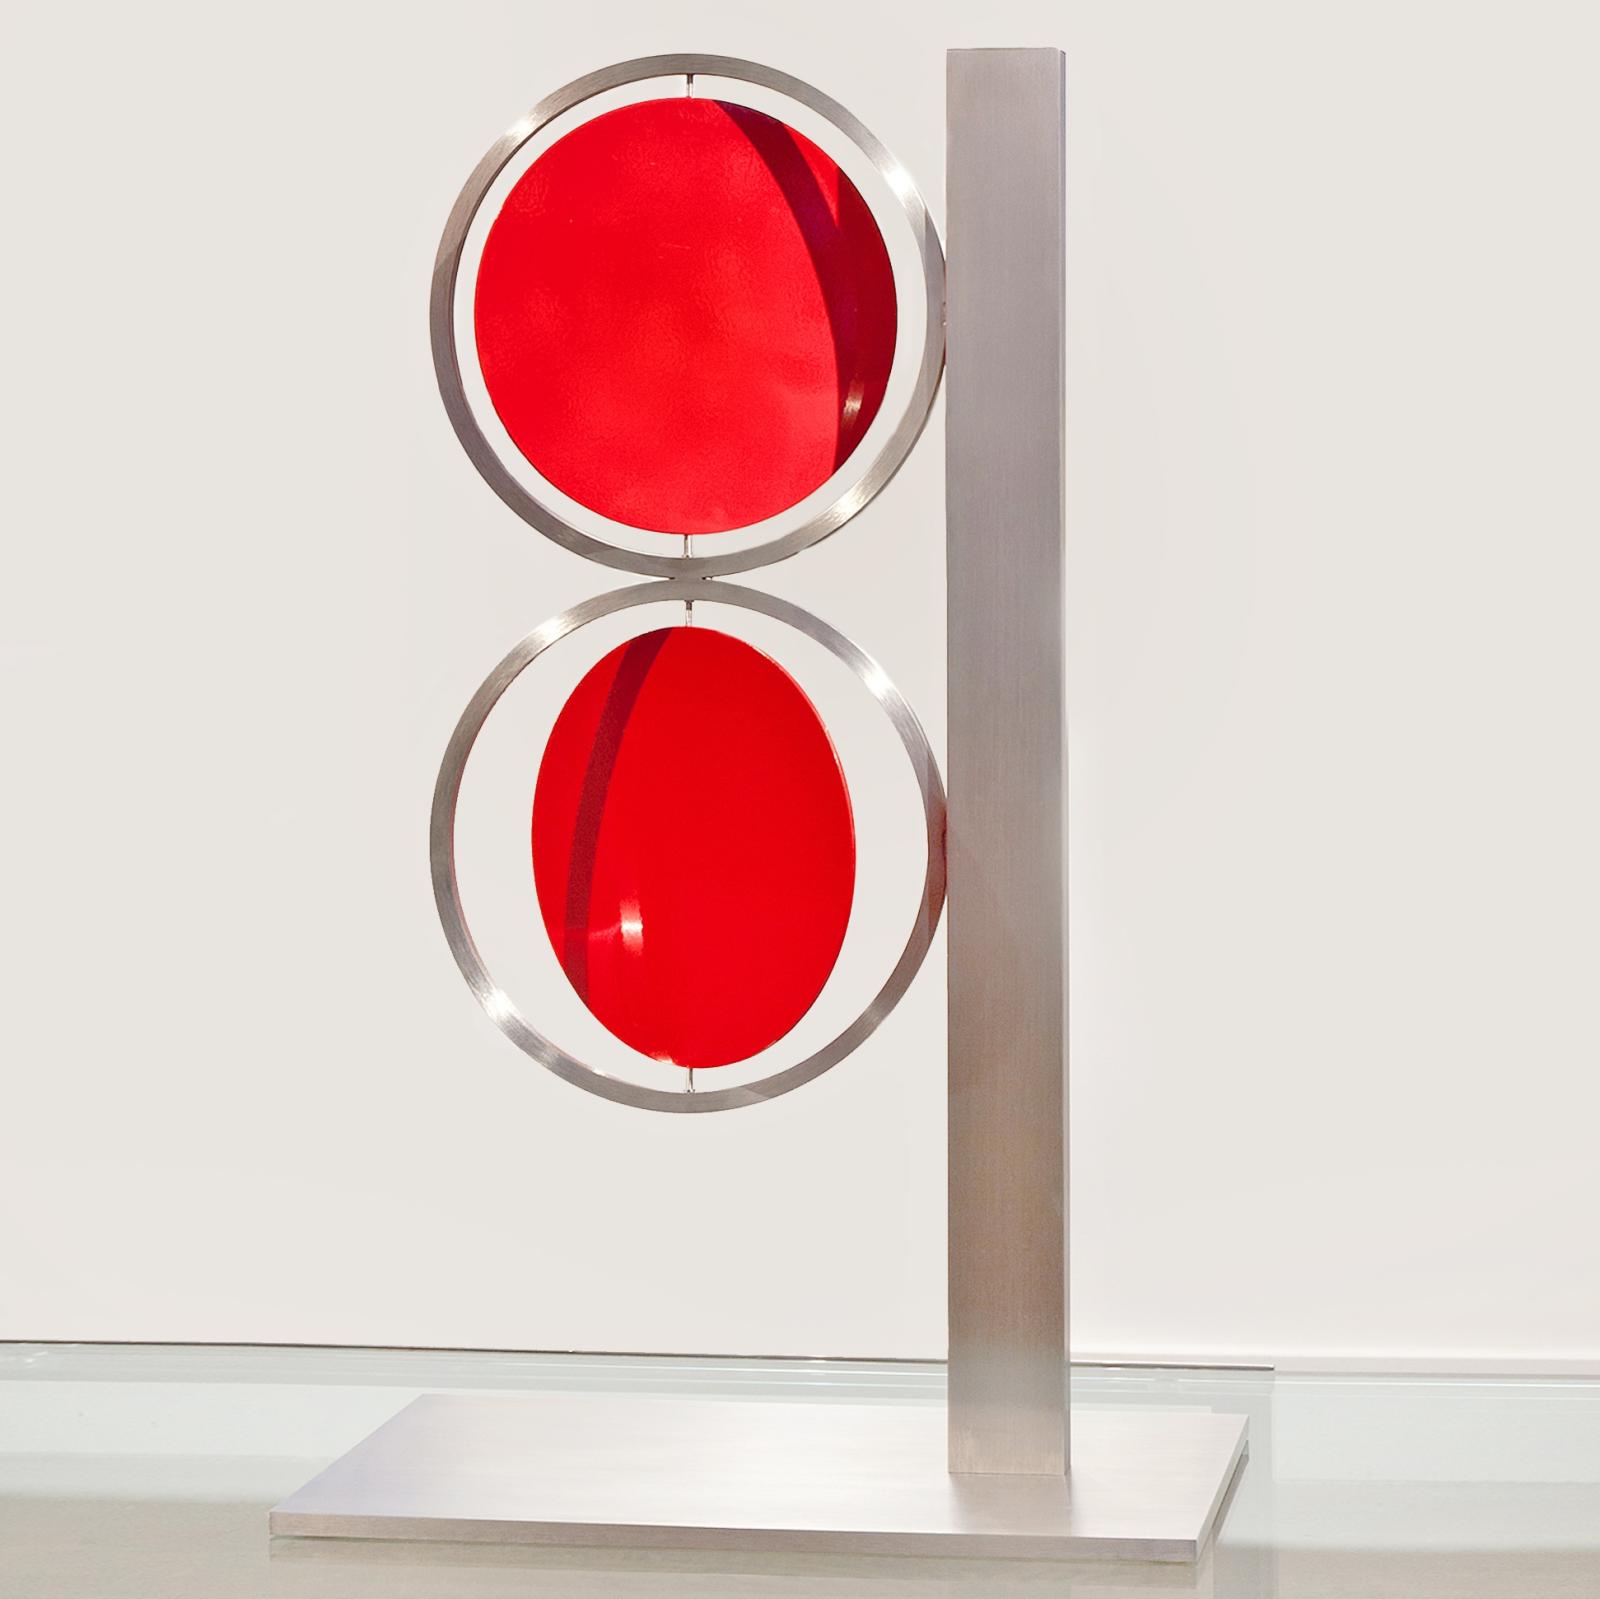 Roger Phillips, 24 inch Red Figure Eight on Column, 2015